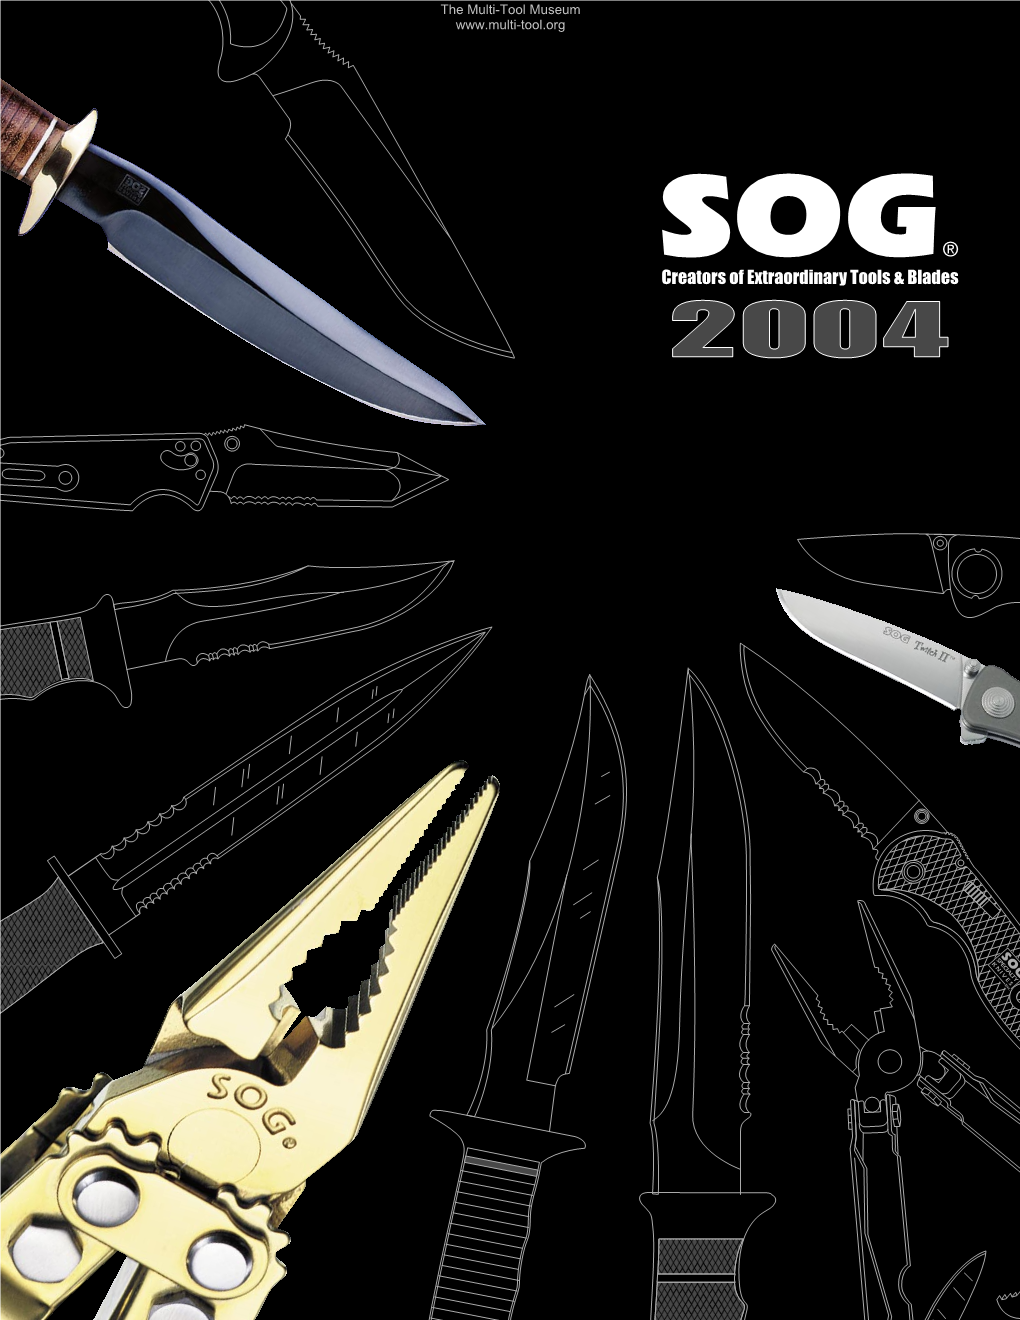 2004 Why SOG ? for Over 17 Years, We’Ve Been Creating the Strongest Multi-Tools on the Market and the Knives That Make Your Buddies Drool